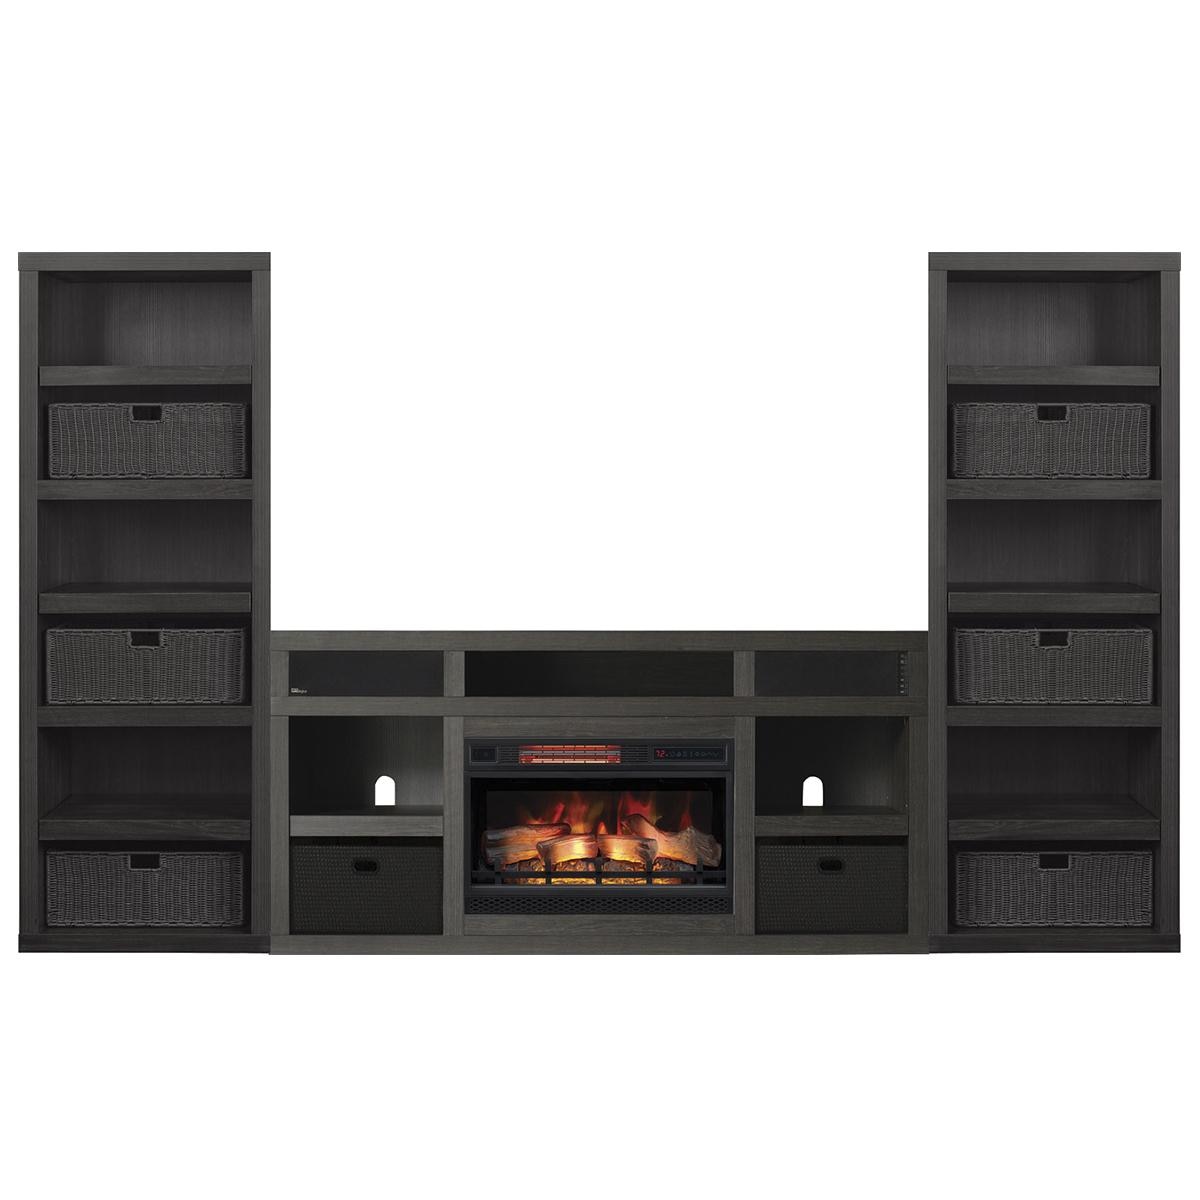 Fireplace Tv Stand Lovely Fabio Flames Greatlin 3 Piece Fireplace Entertainment Wall